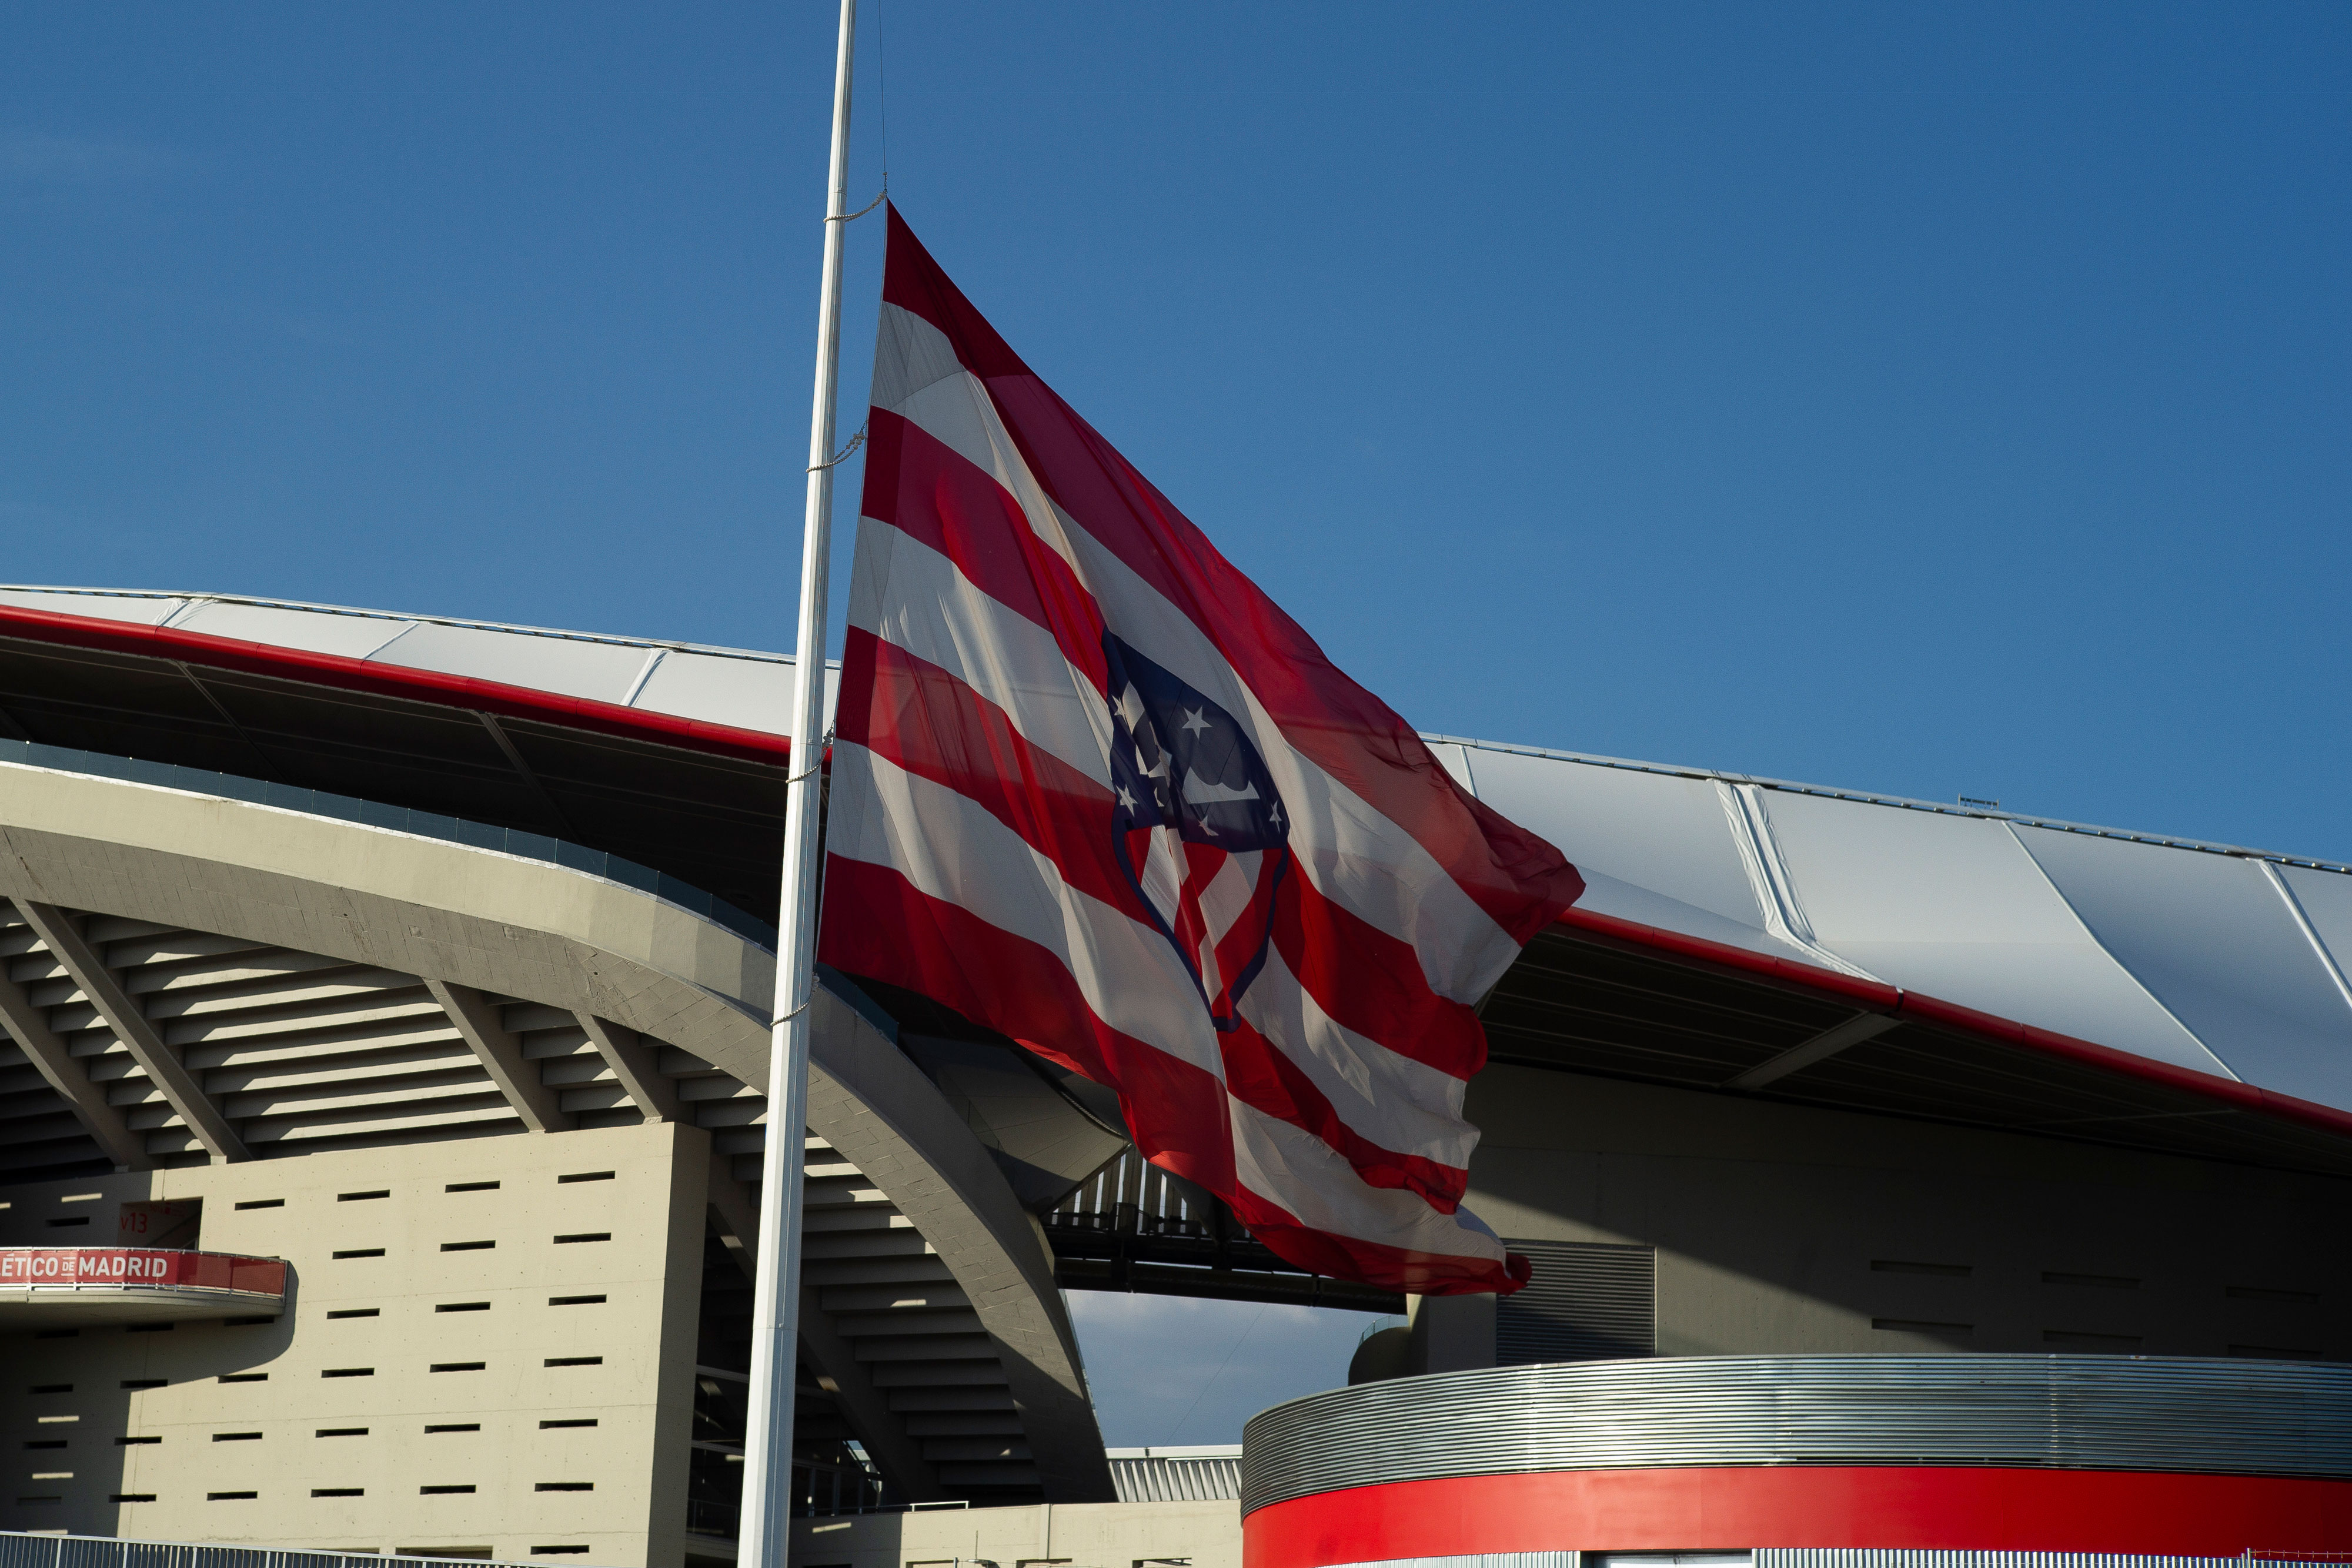 The Atlético Madrid flag flies at half-staff in memory of Covid-19 victims at the Wanda Metropolitano Stadium in Madrid on June 2, 2020.